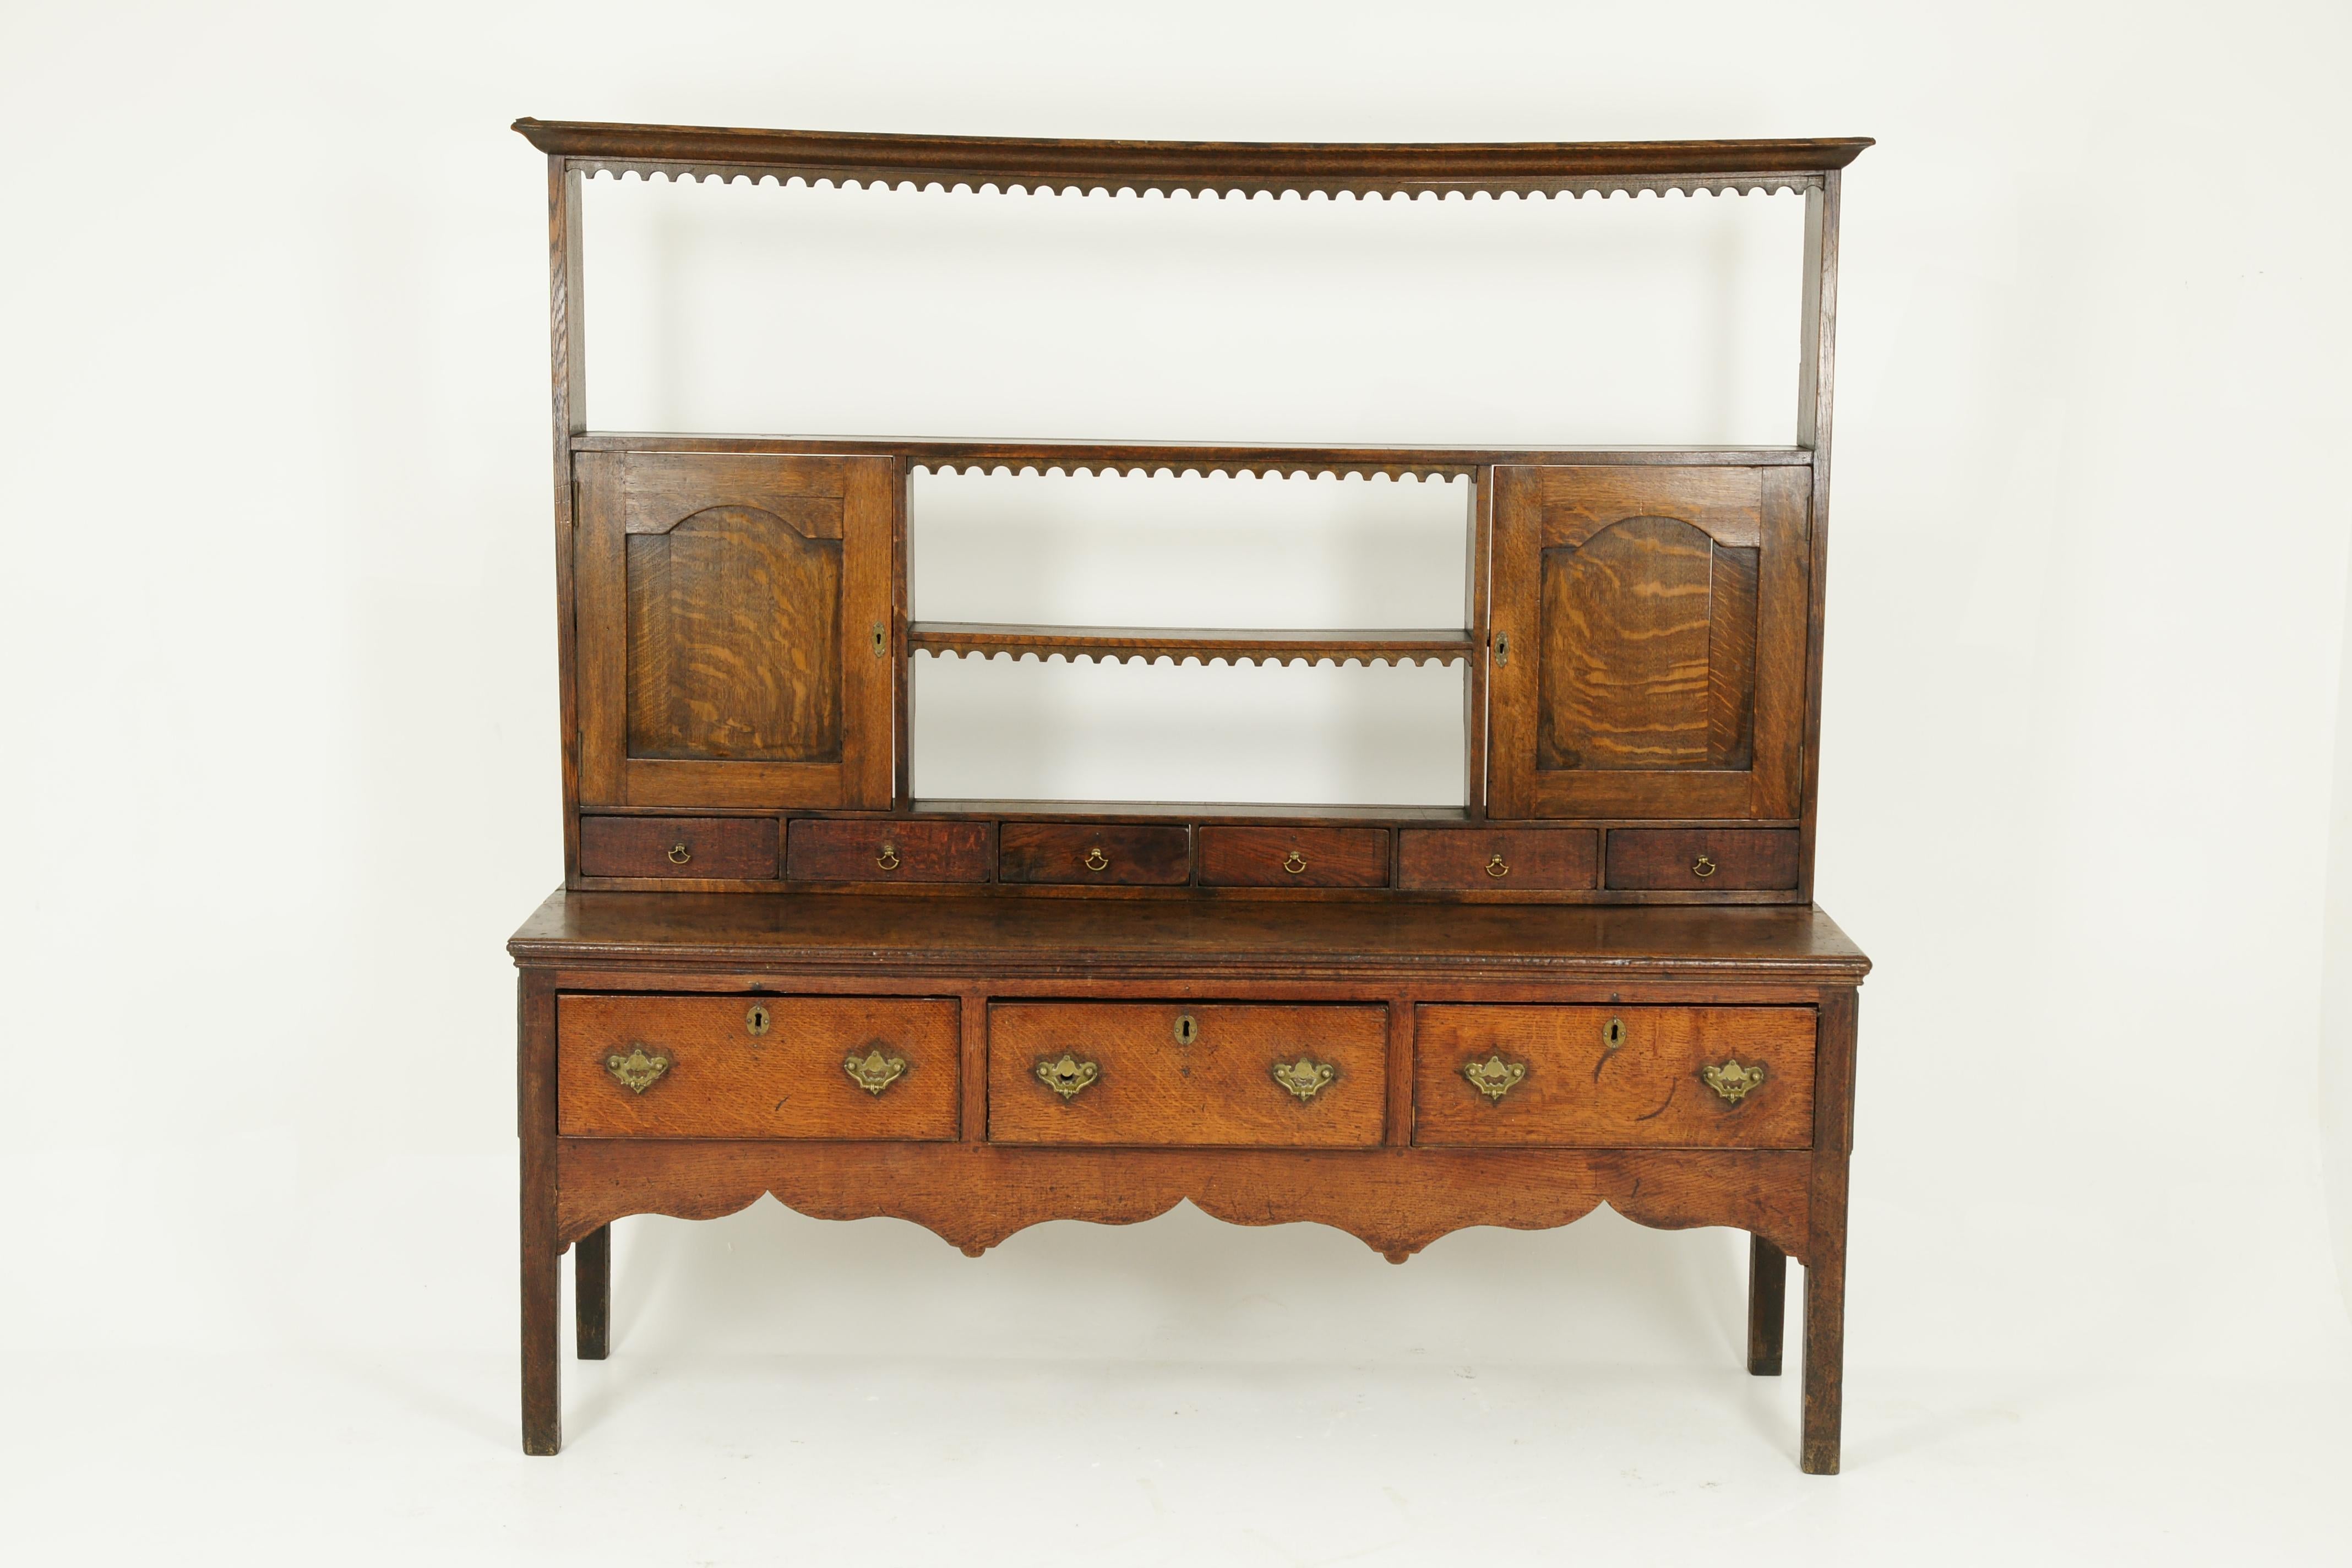 Late 18th Century Antique Welsh Dresser, Antique Sideboard, Farmhouse Chic, England 1790, B1578